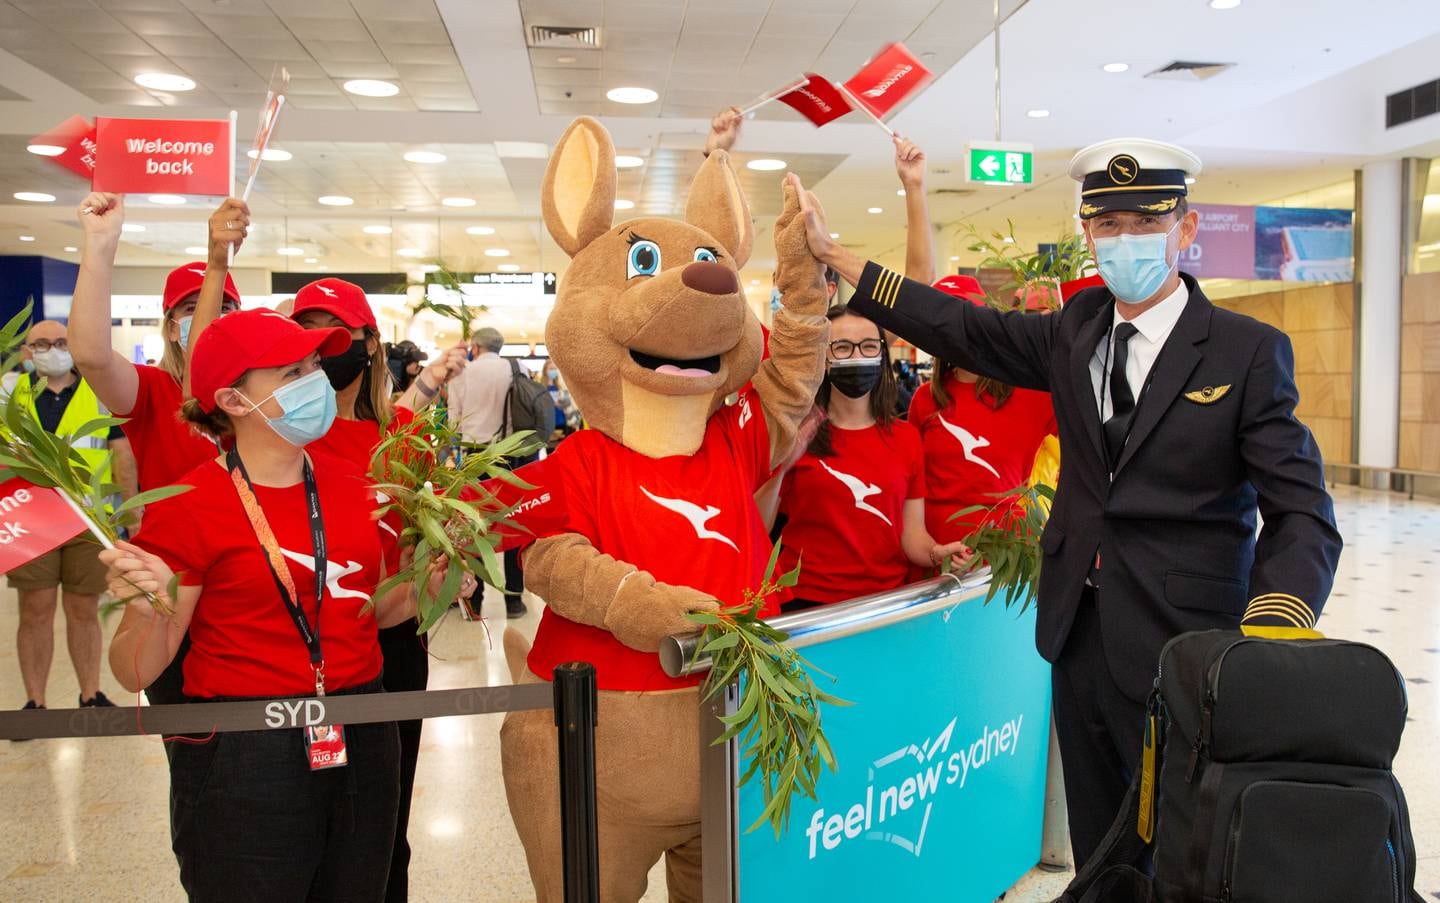 Australians plan to spend the most on international travel in 2023. The country had some of the world's longest Covid-19 restrictions, and was closed to international visitors for two years. Photo: Qantas